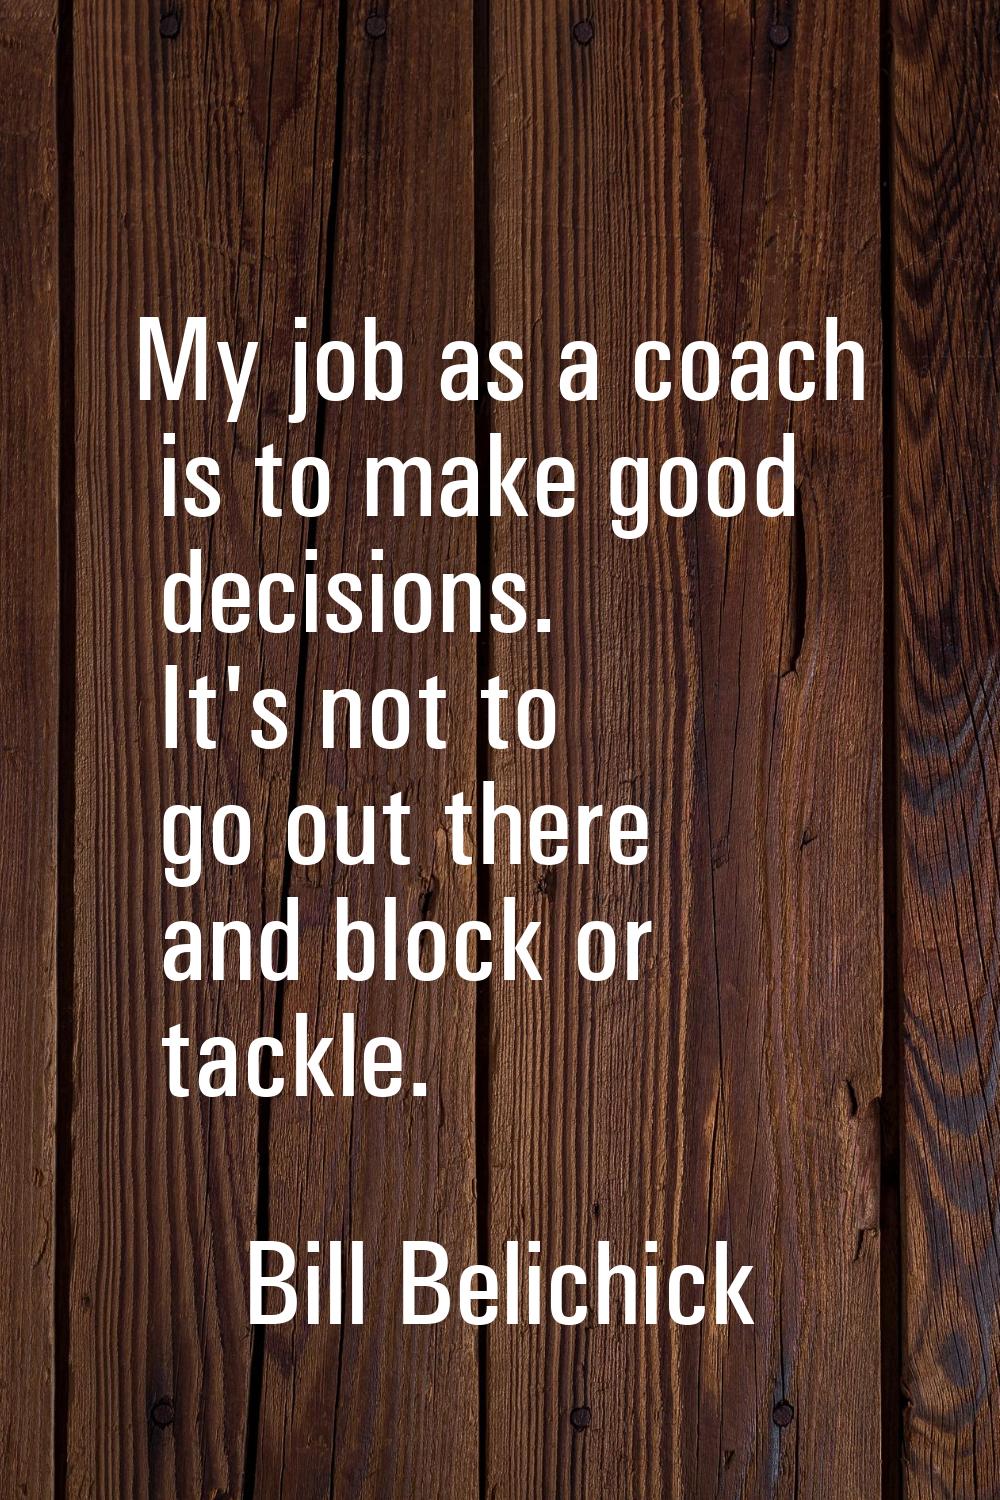 My job as a coach is to make good decisions. It's not to go out there and block or tackle.